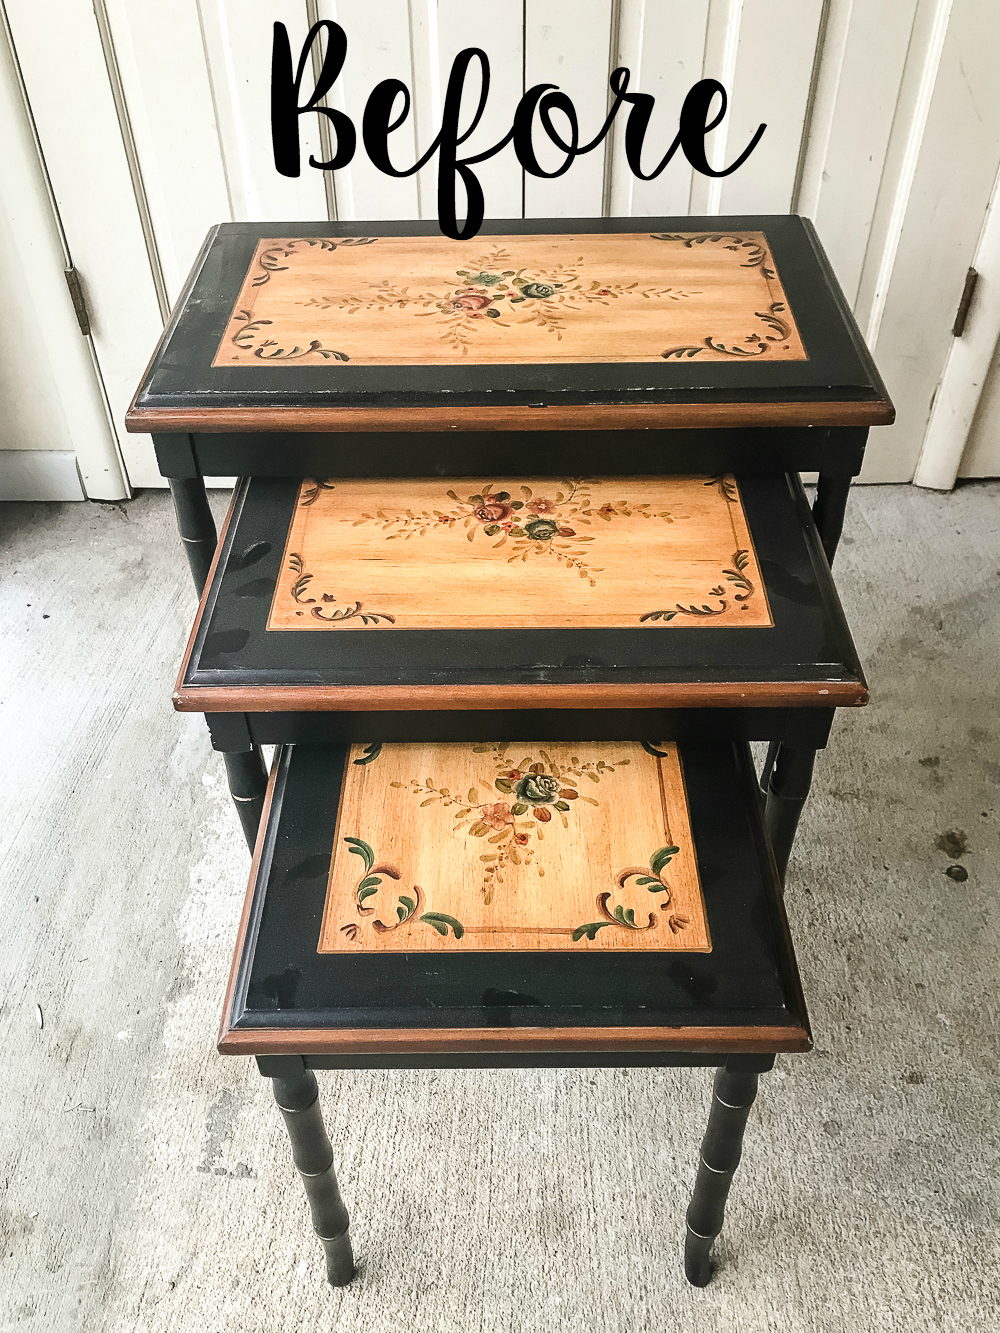 faux bone inlay nesting tables makeover bless house before accent table blesserhouse how stencil furniture dining room wall decor ideas wicker basket end glass top west elm